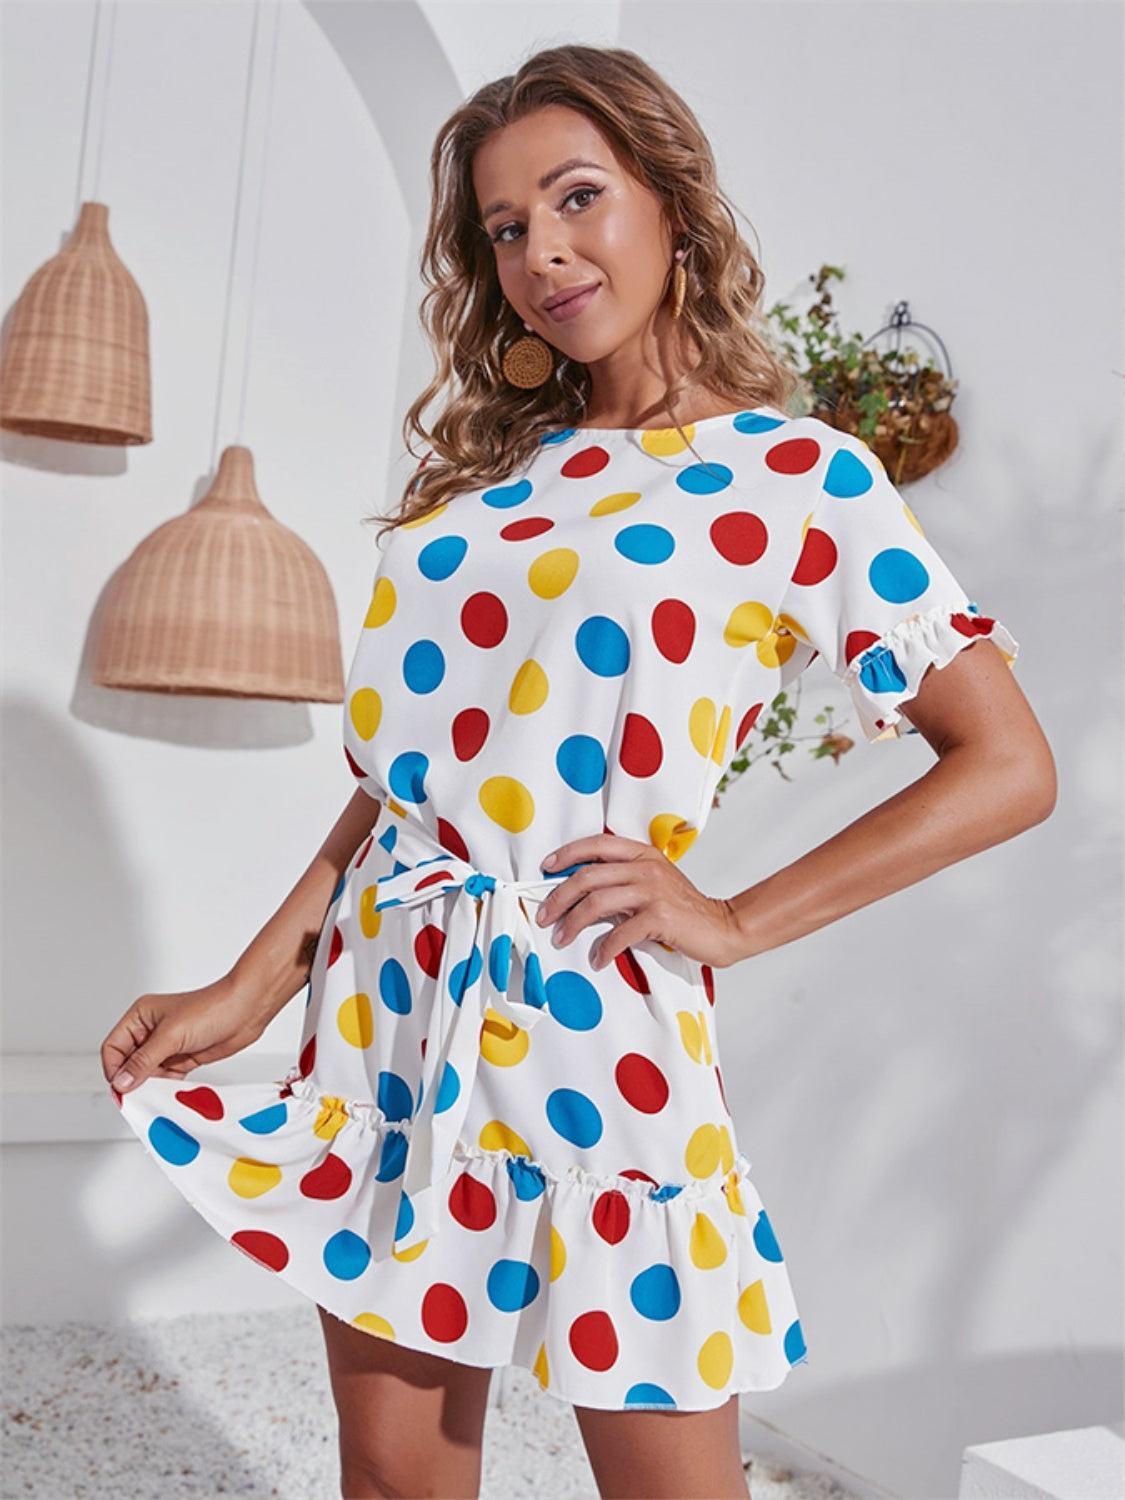 a woman in a polka dot dress posing for a picture